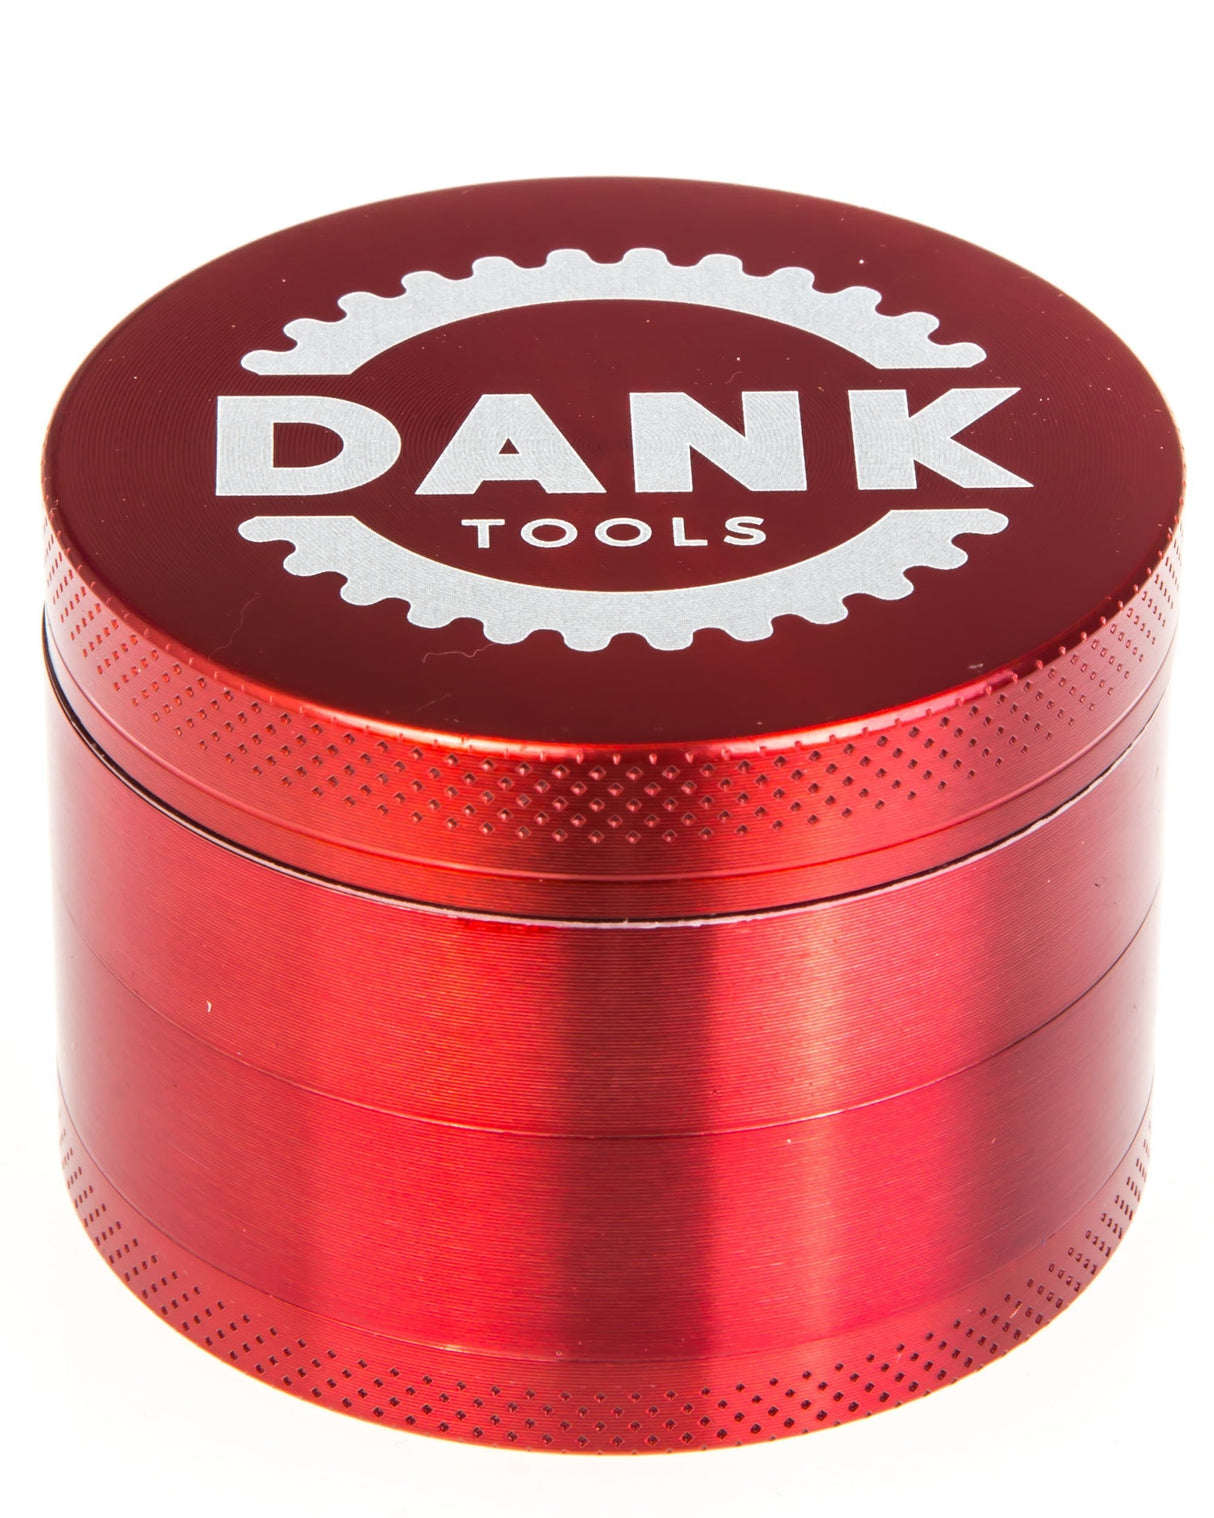 Dank Tools Red 50mm 4-Piece Aluminum Herb Grinder, Front View on White Background